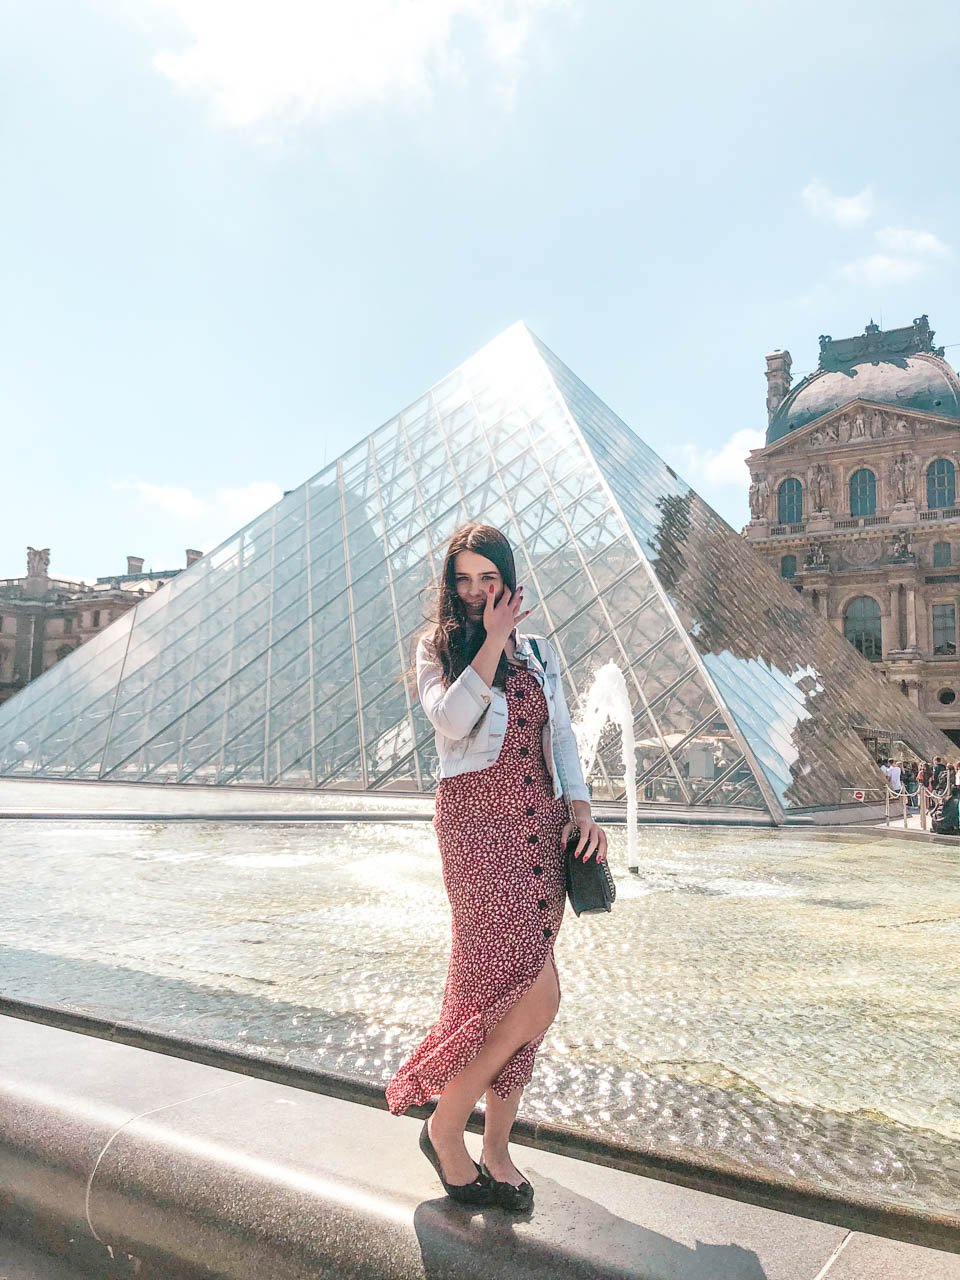 Woman in a red and white floral dress standing on a fountain in front of the Louvre Pyramid